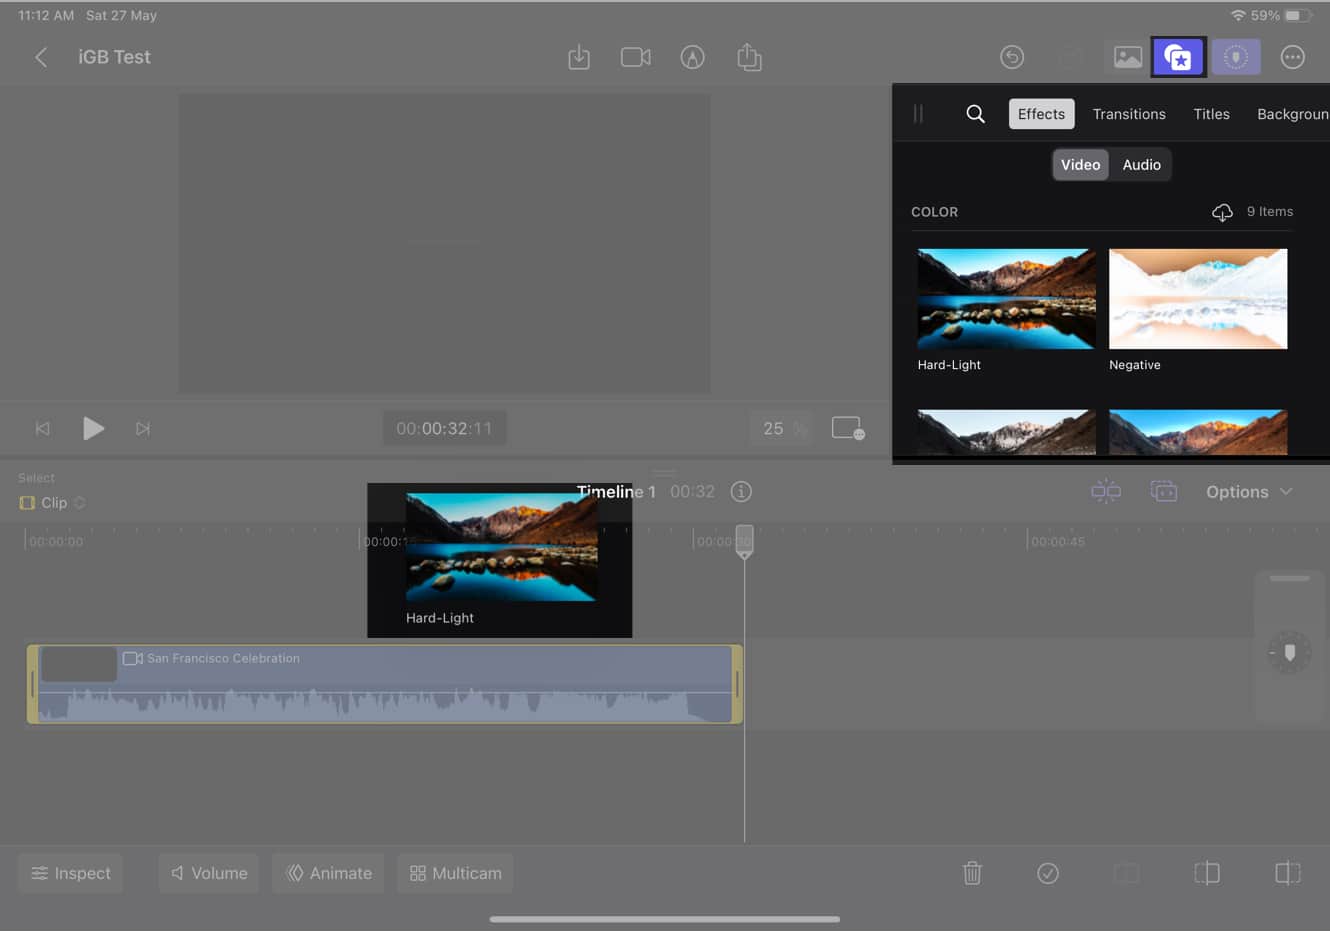 Adding titles, effects, and other editing features in a video on Final Cut Pro